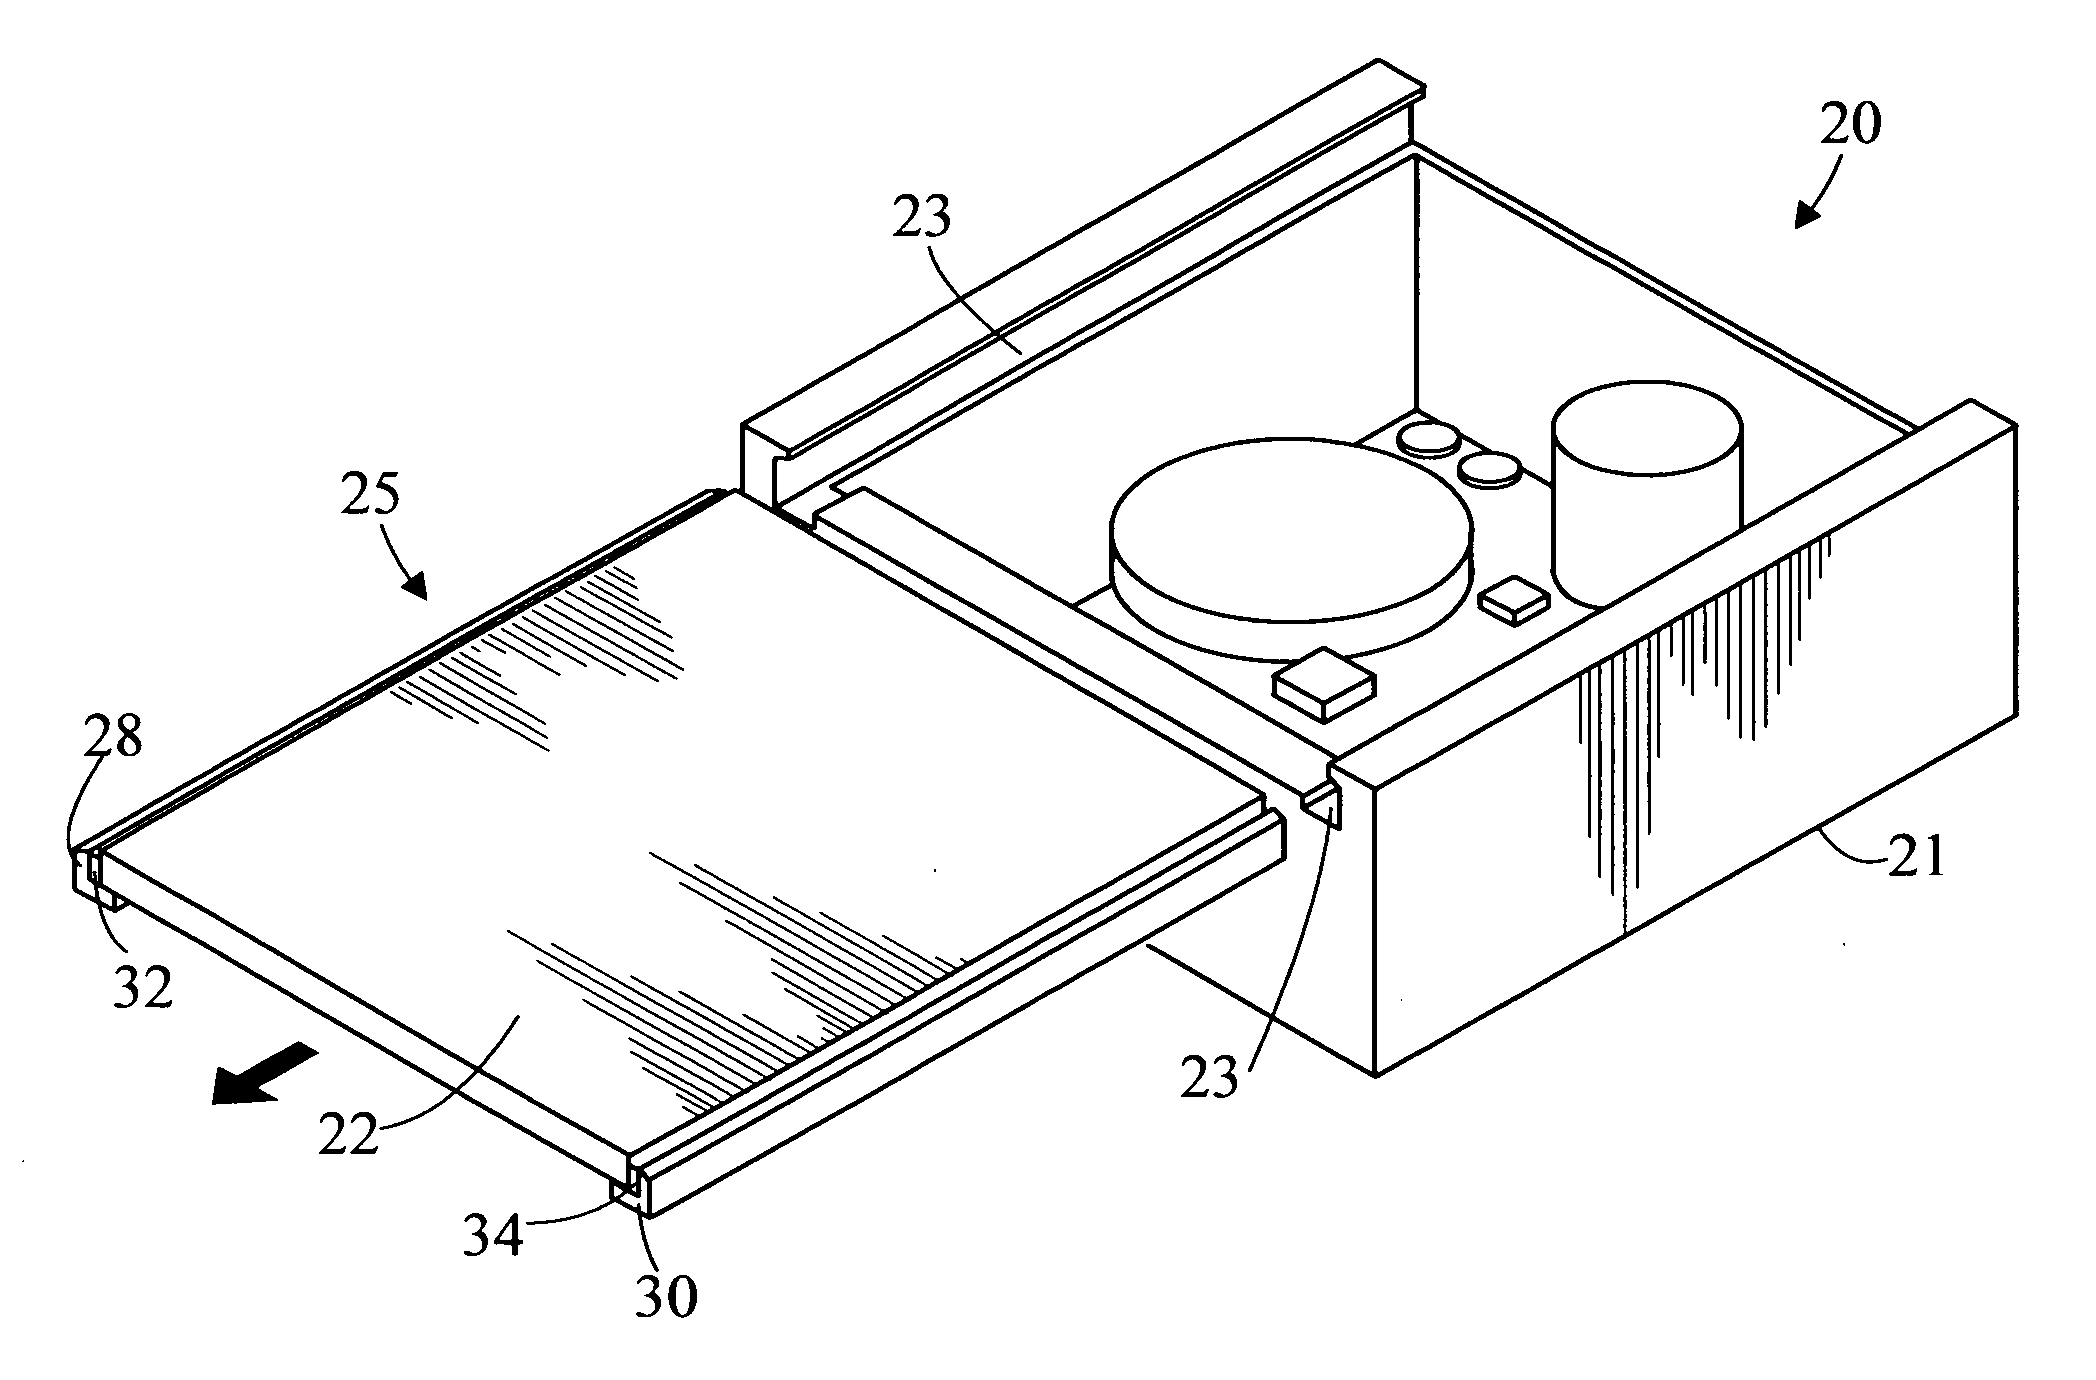 Enclosure system and method of use